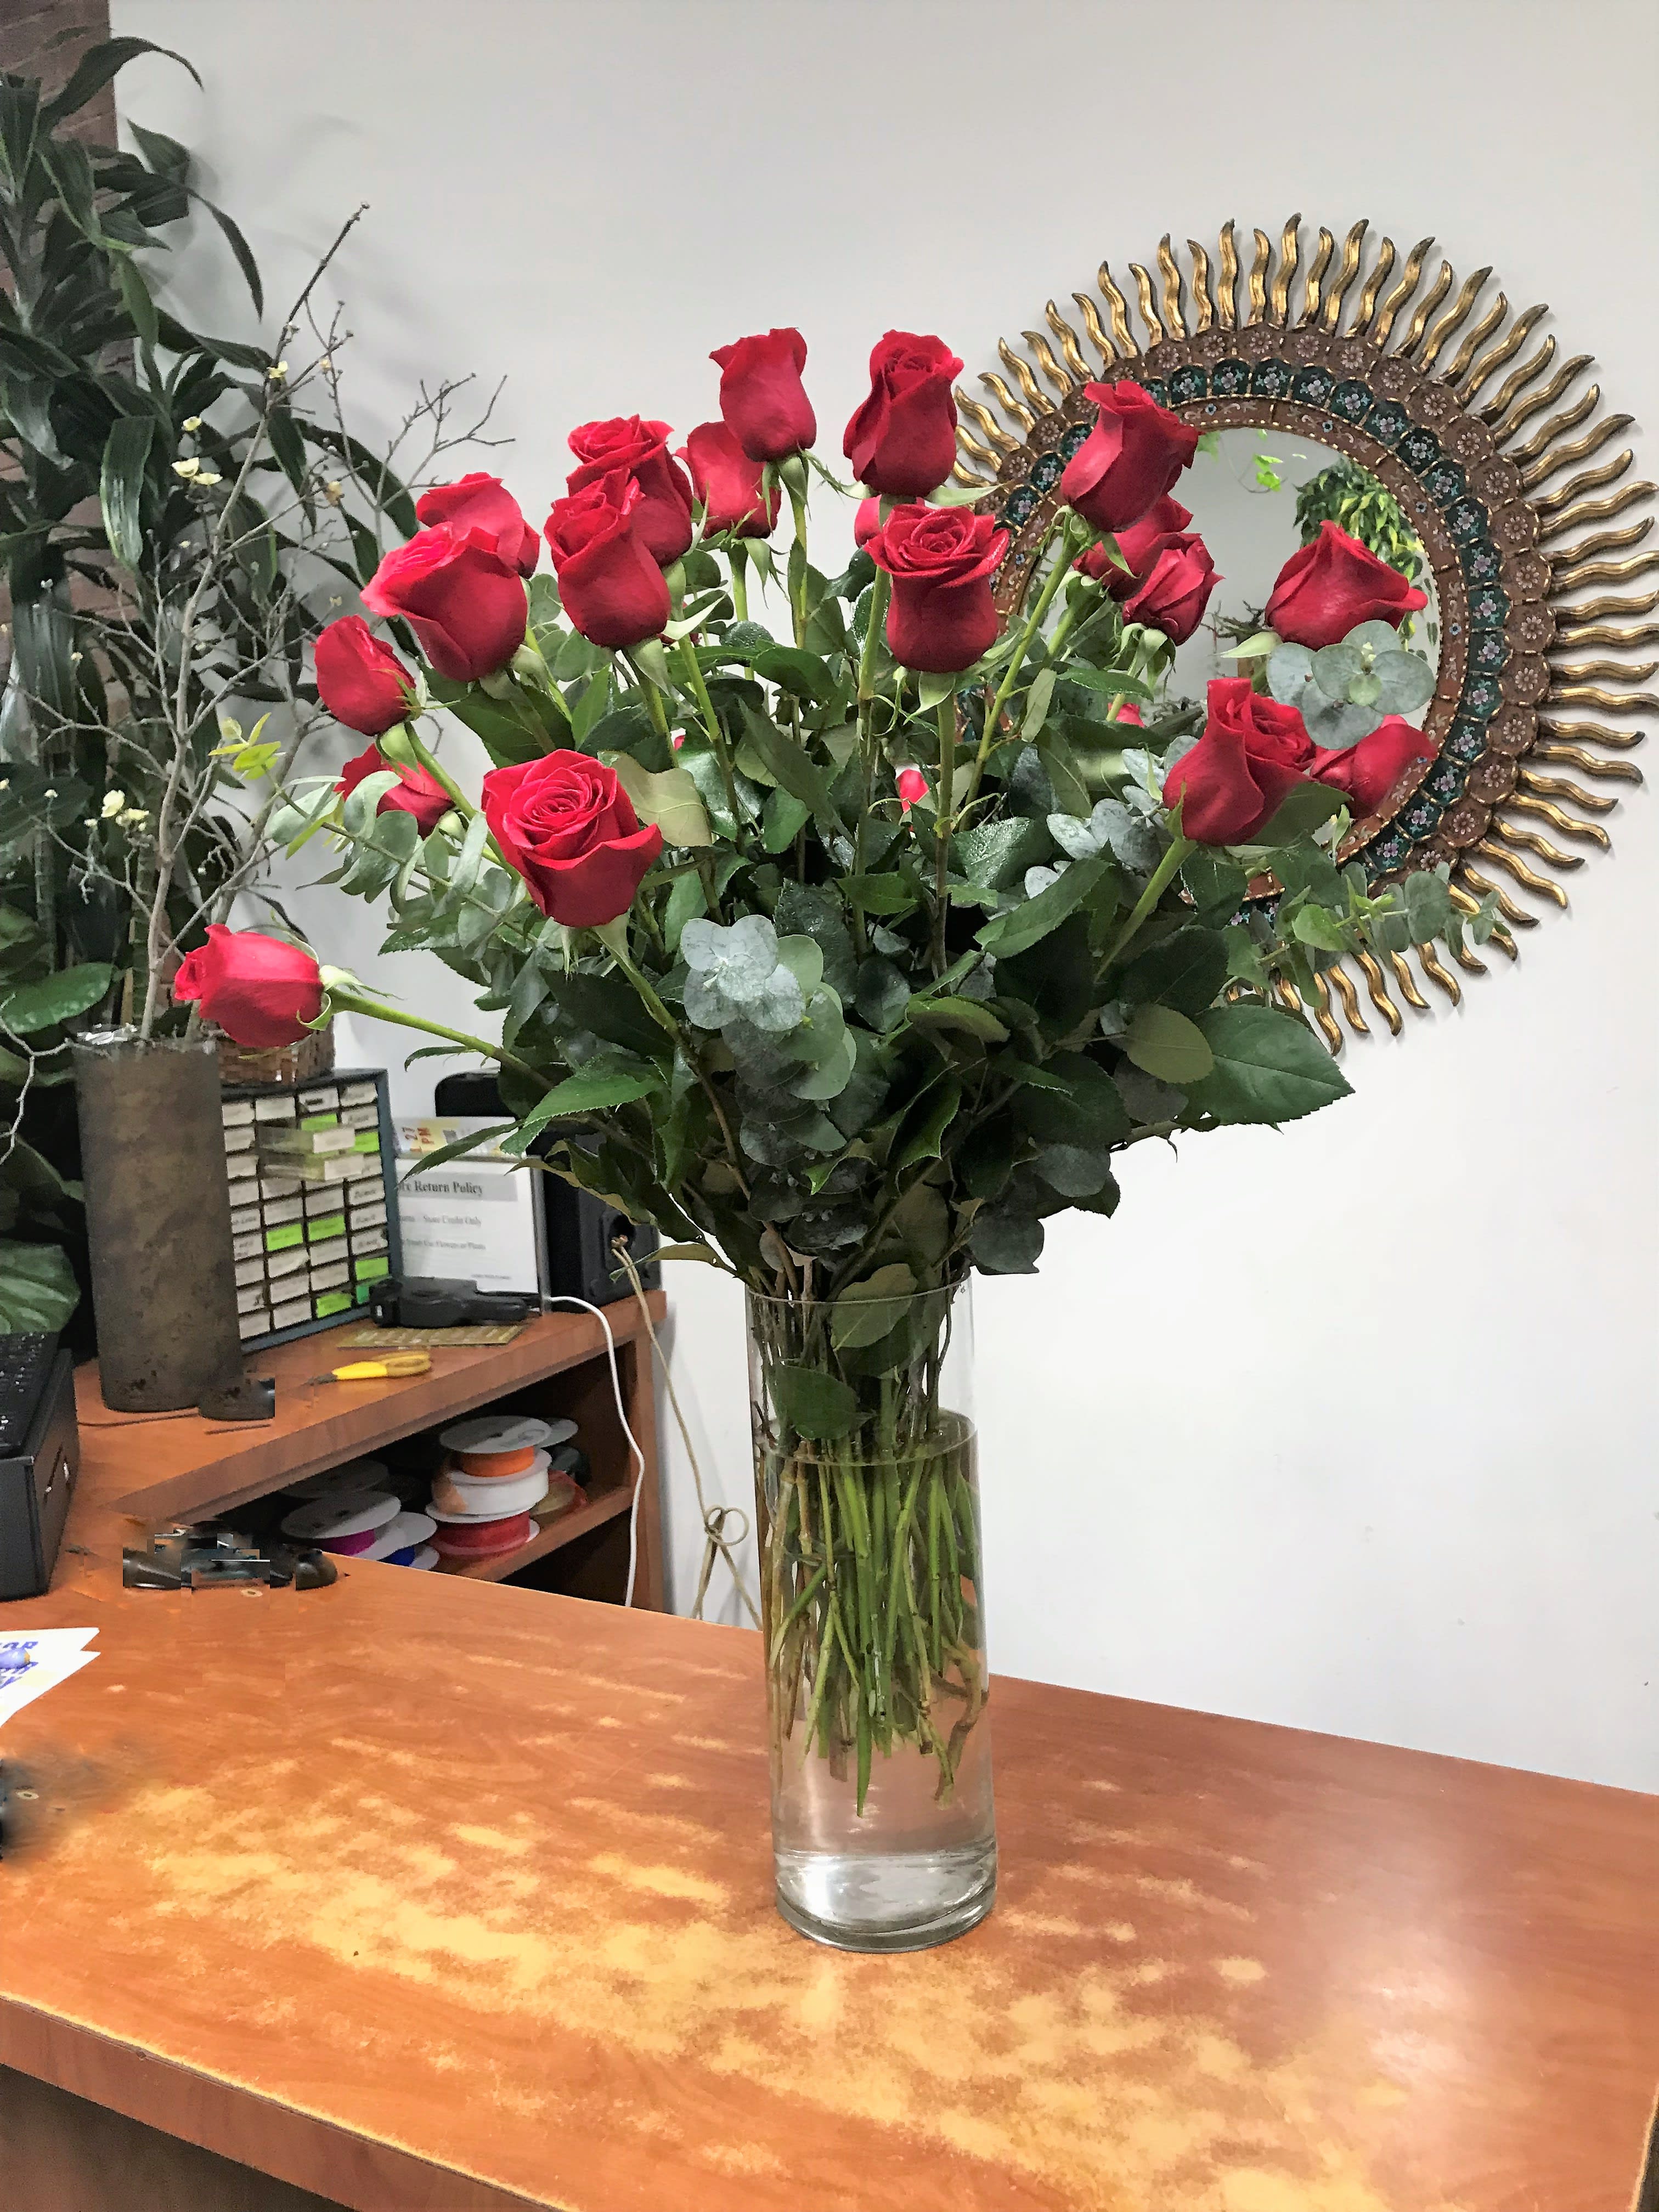 Romantic Reds  - Simplicity and elegance! A beautiful creation of James Weir's designers' team. Two dozen long stem red roses are arranged in a clear glass vase. Note: Valentine's Day may impact the prices and availability of this product. 